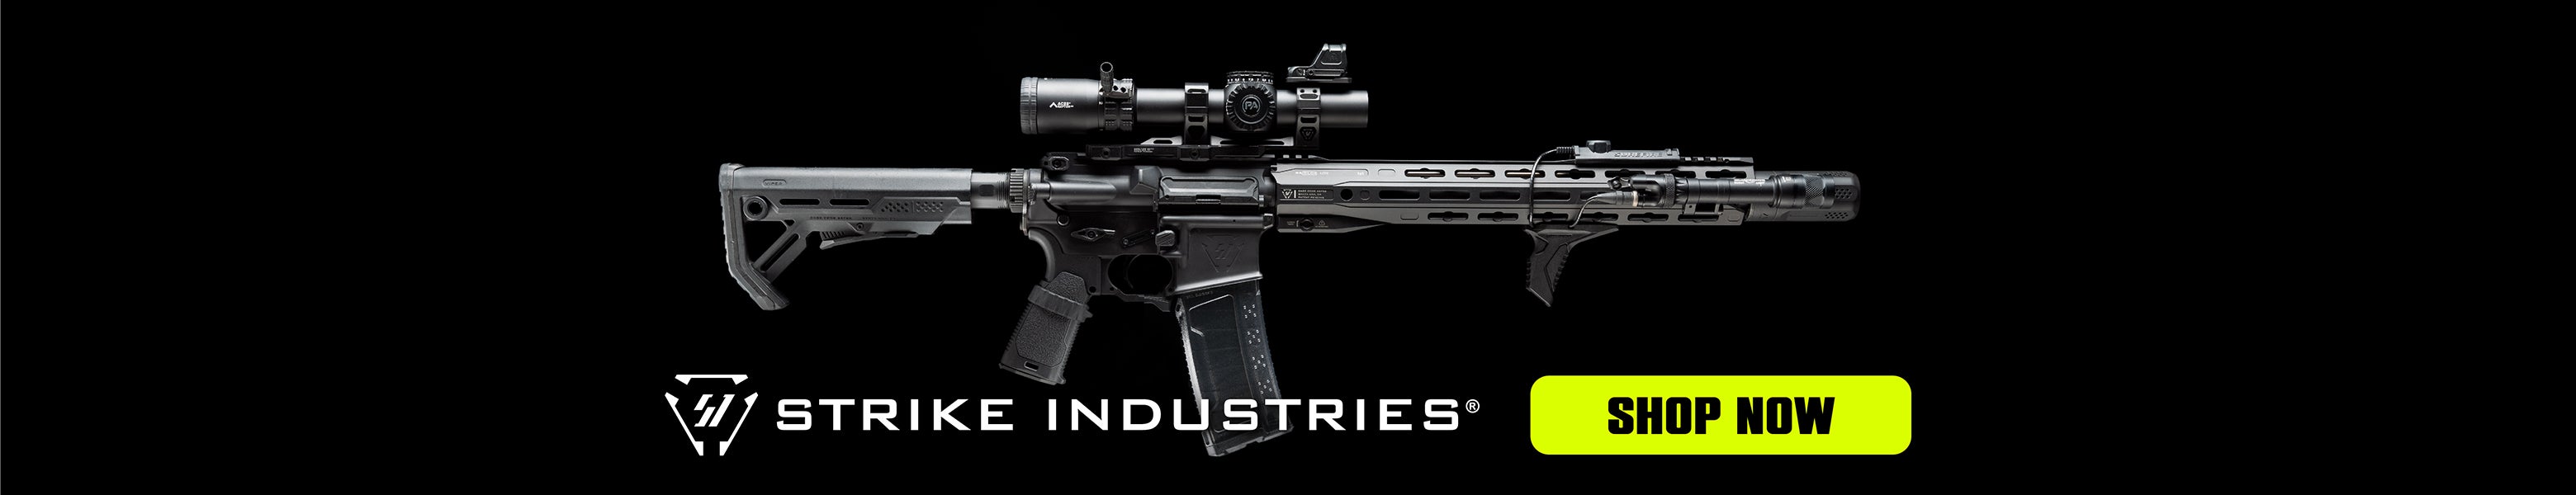 Shop All Strike Industries Products